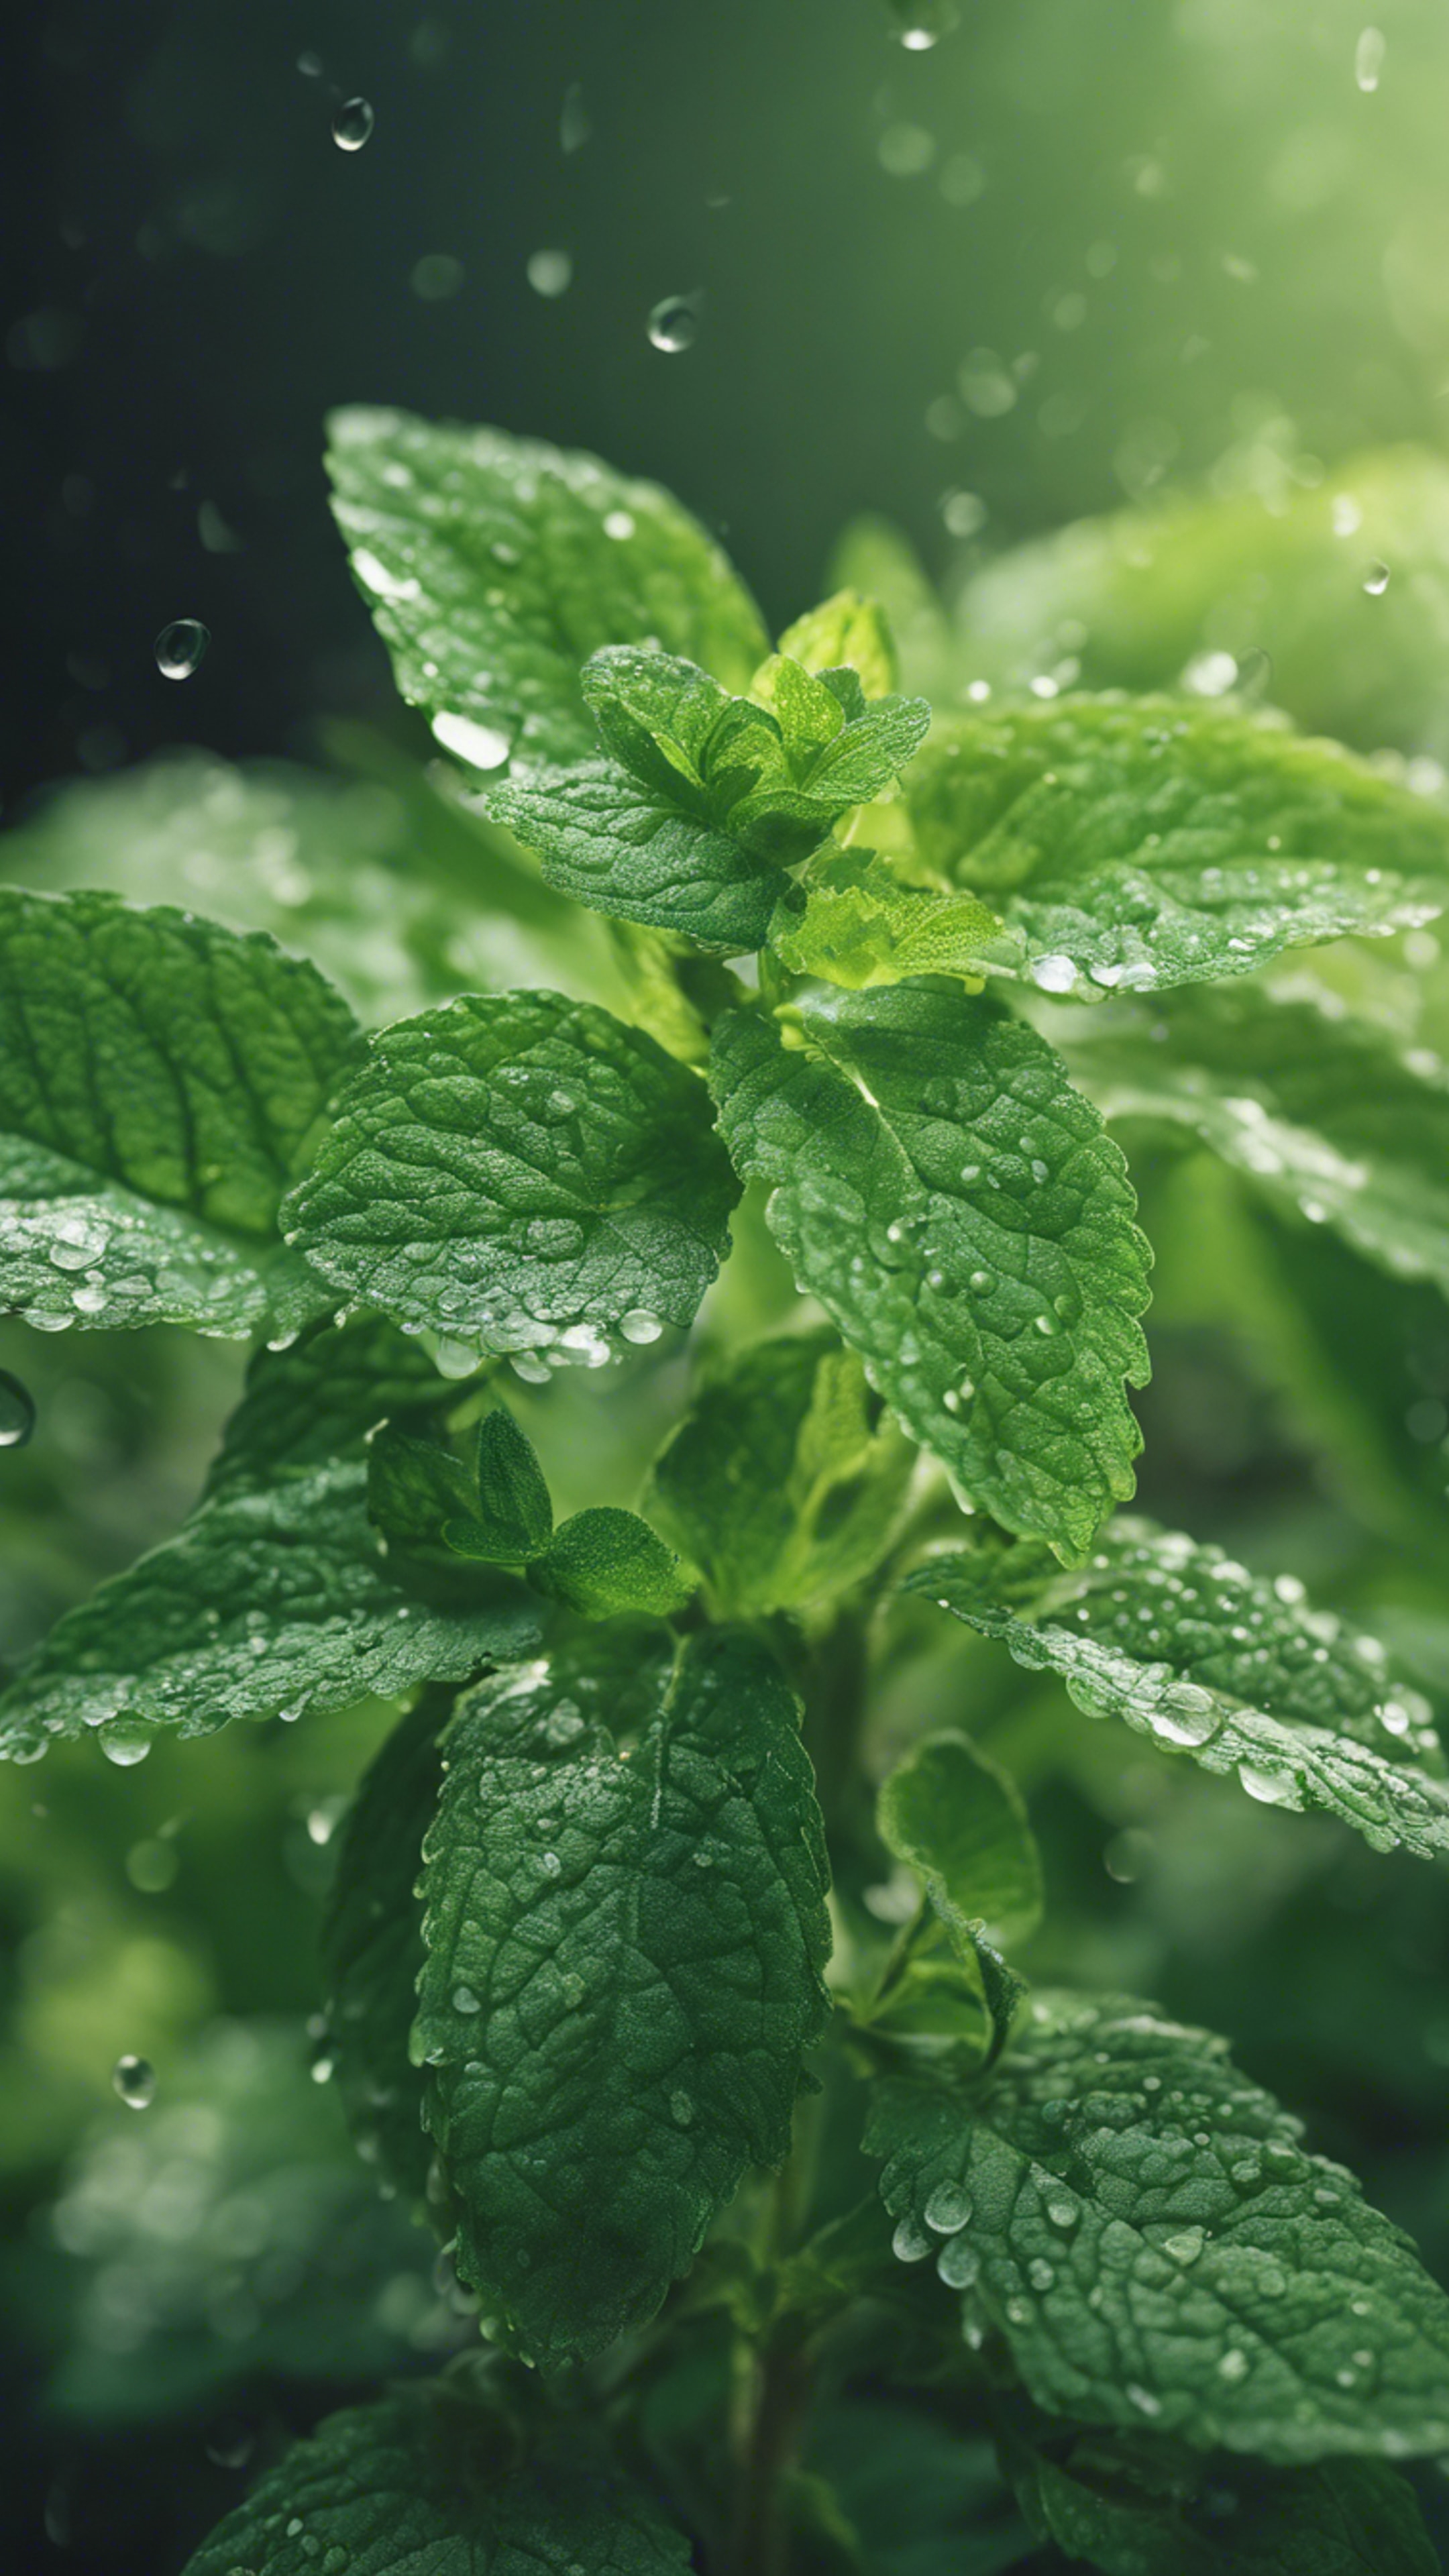 A closeup of a refreshing mint plant with dew drops on its fresh green leaves. Fond d'écran[bde7a5587e54449fbb31]